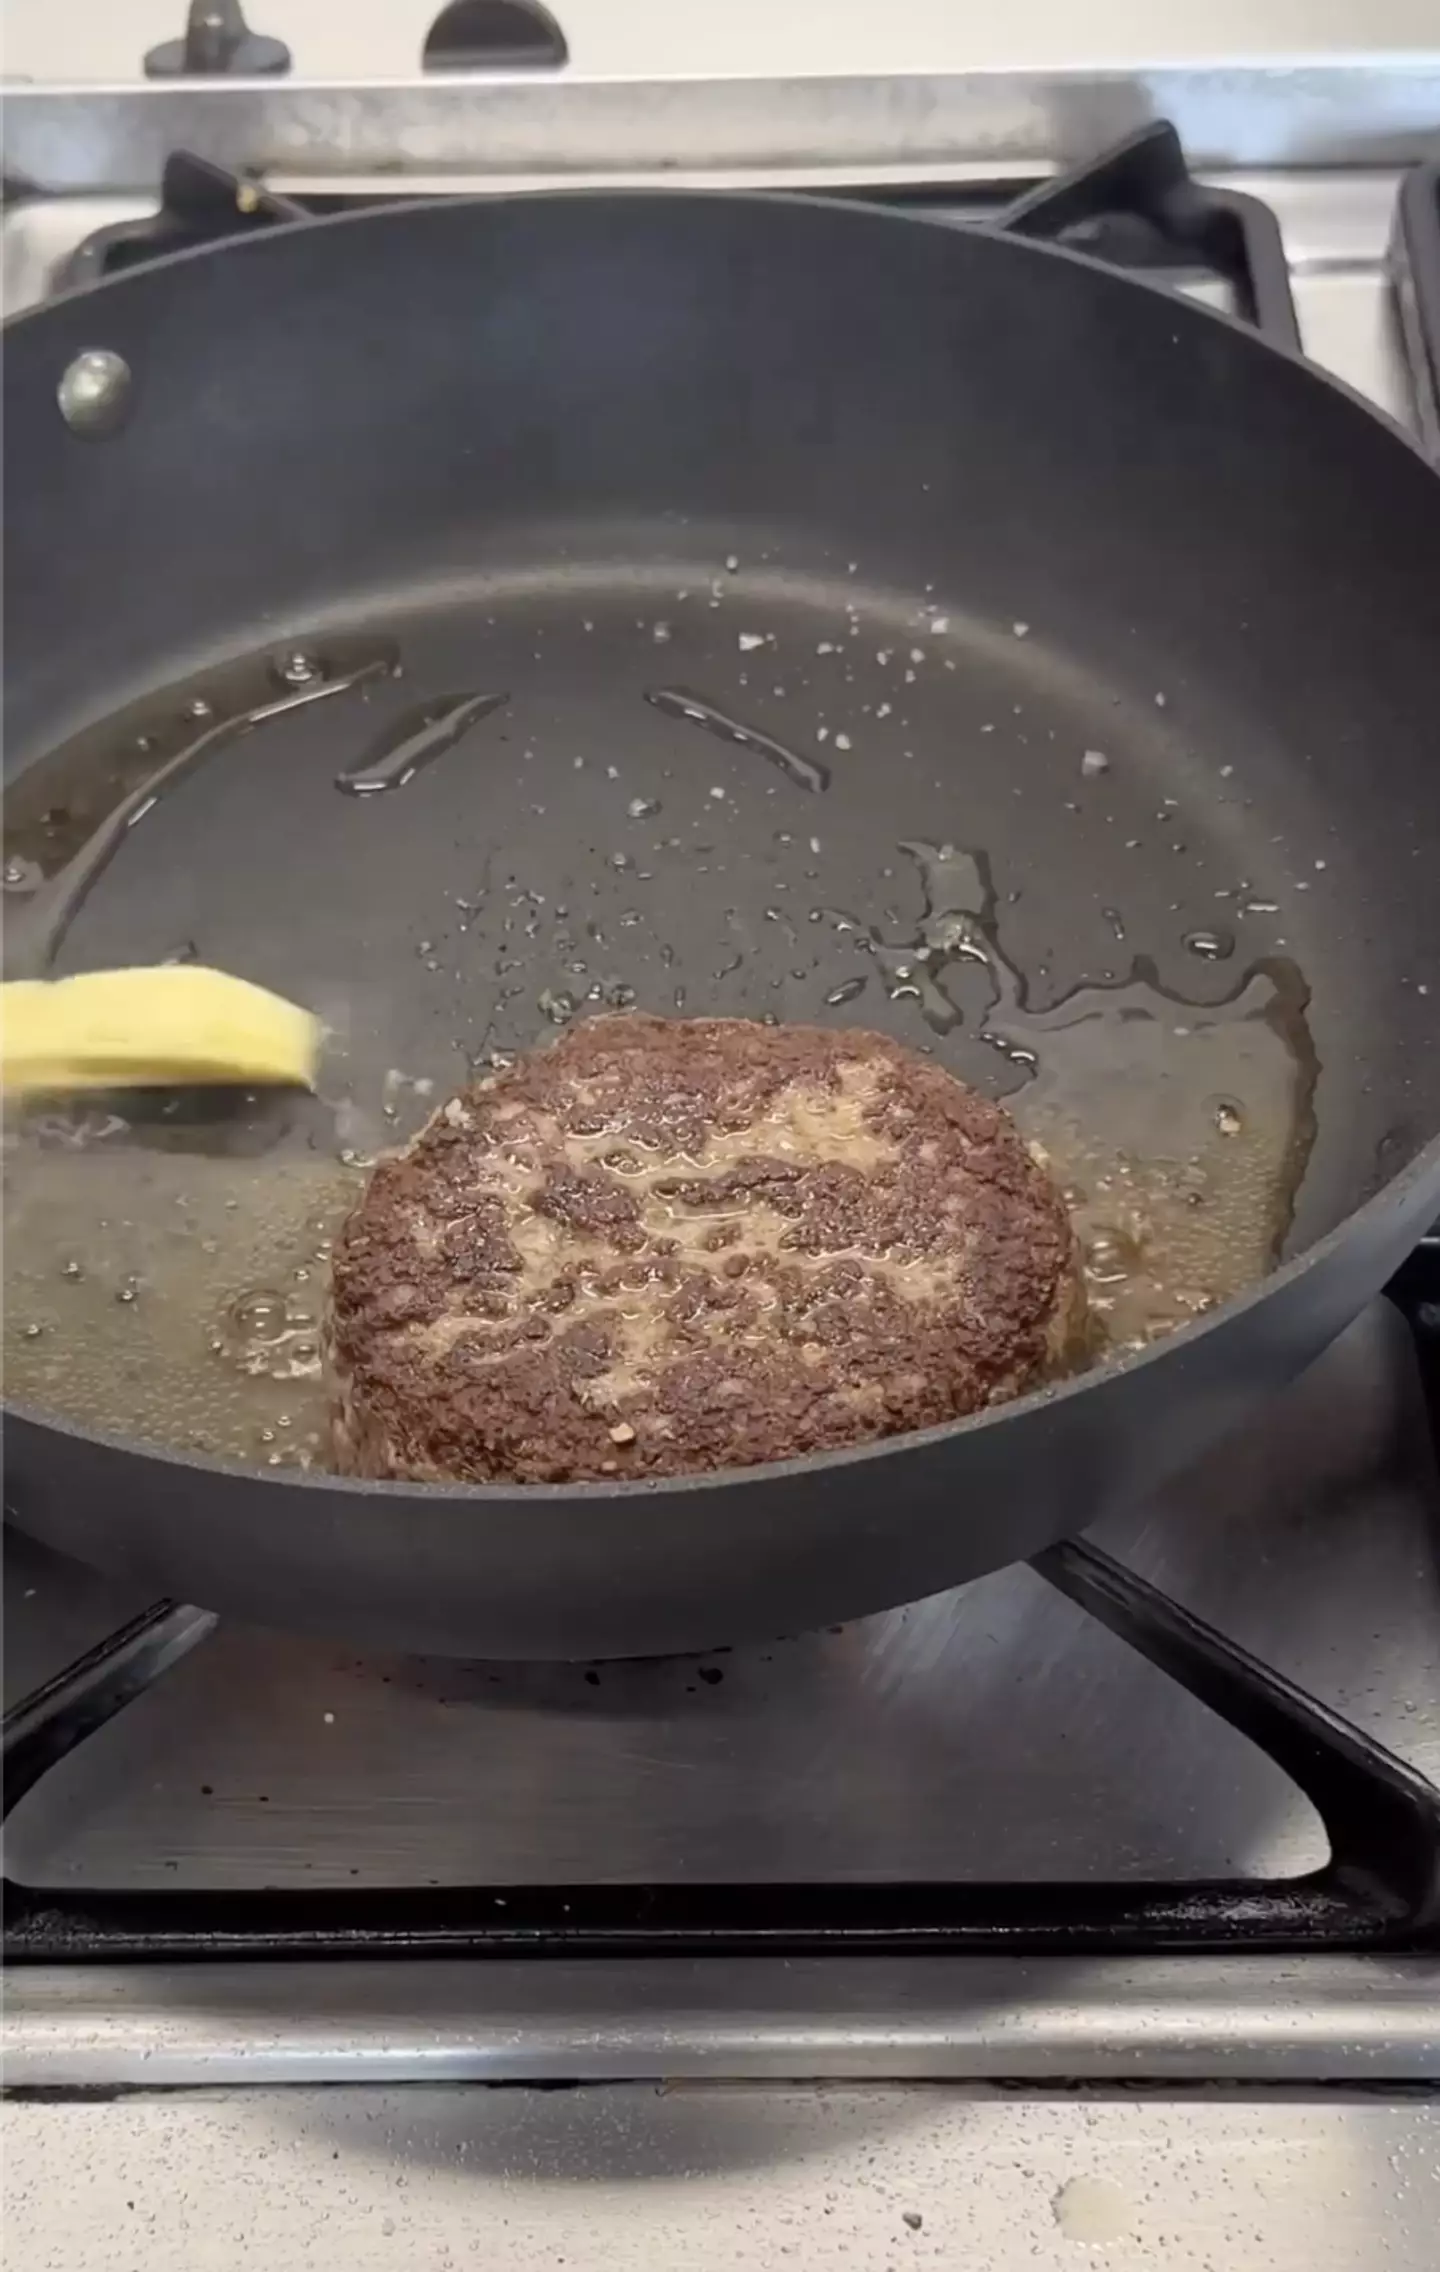 Some also said that the wagyu burger may have been overcooked.